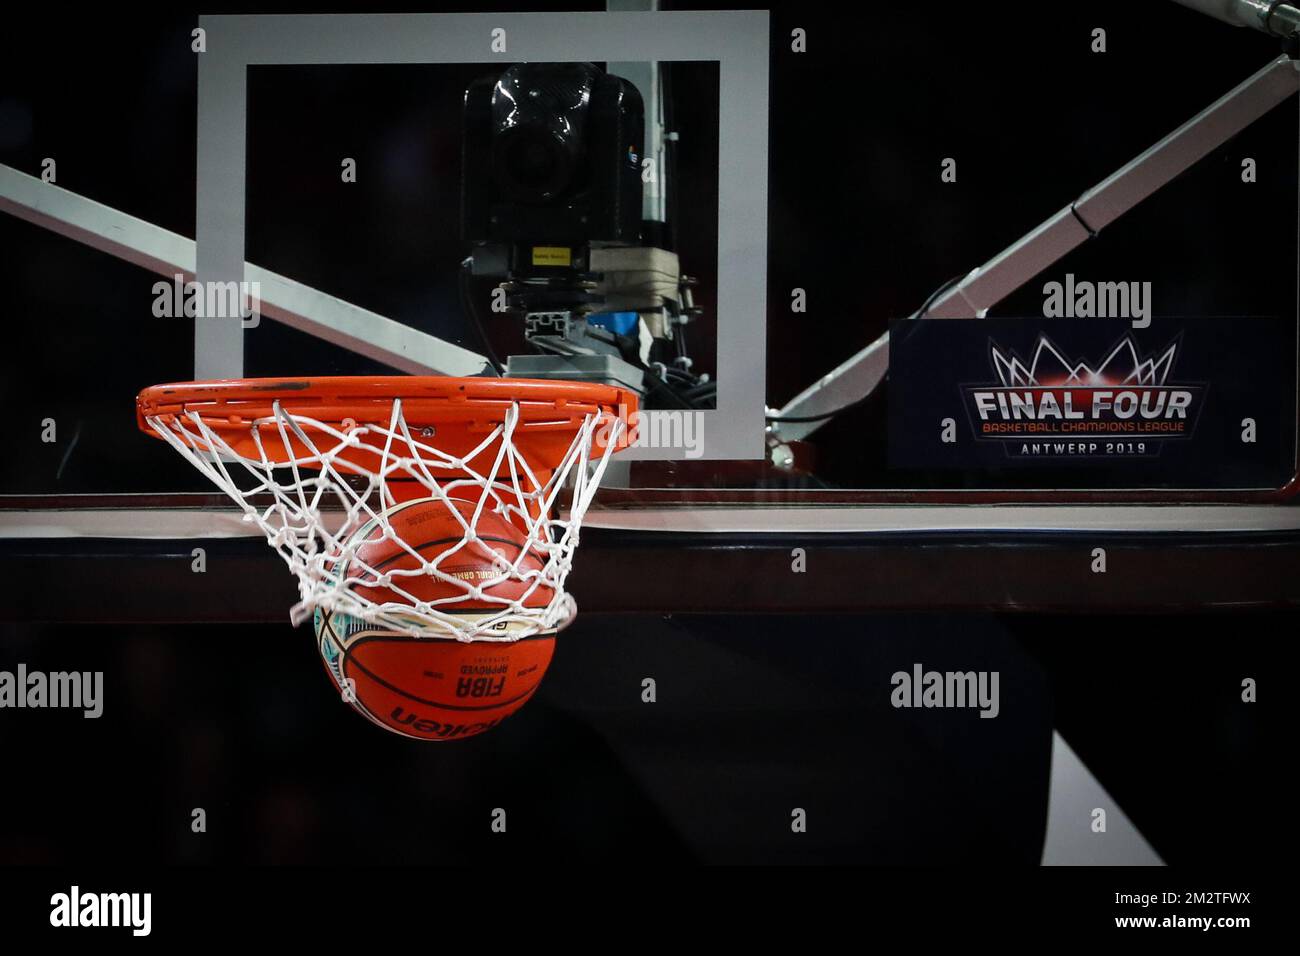 General image of a goal during a basketball match between German team Brose Bamberg and Italian Virtus Pallacanestro Bologna, the first leg of the 'Final Four' semi-finals of the men's Champions League basketball competition, Friday 03 May 2019 in Antwerp. BELGA PHOTO DAVID PINTENS Stock Photo